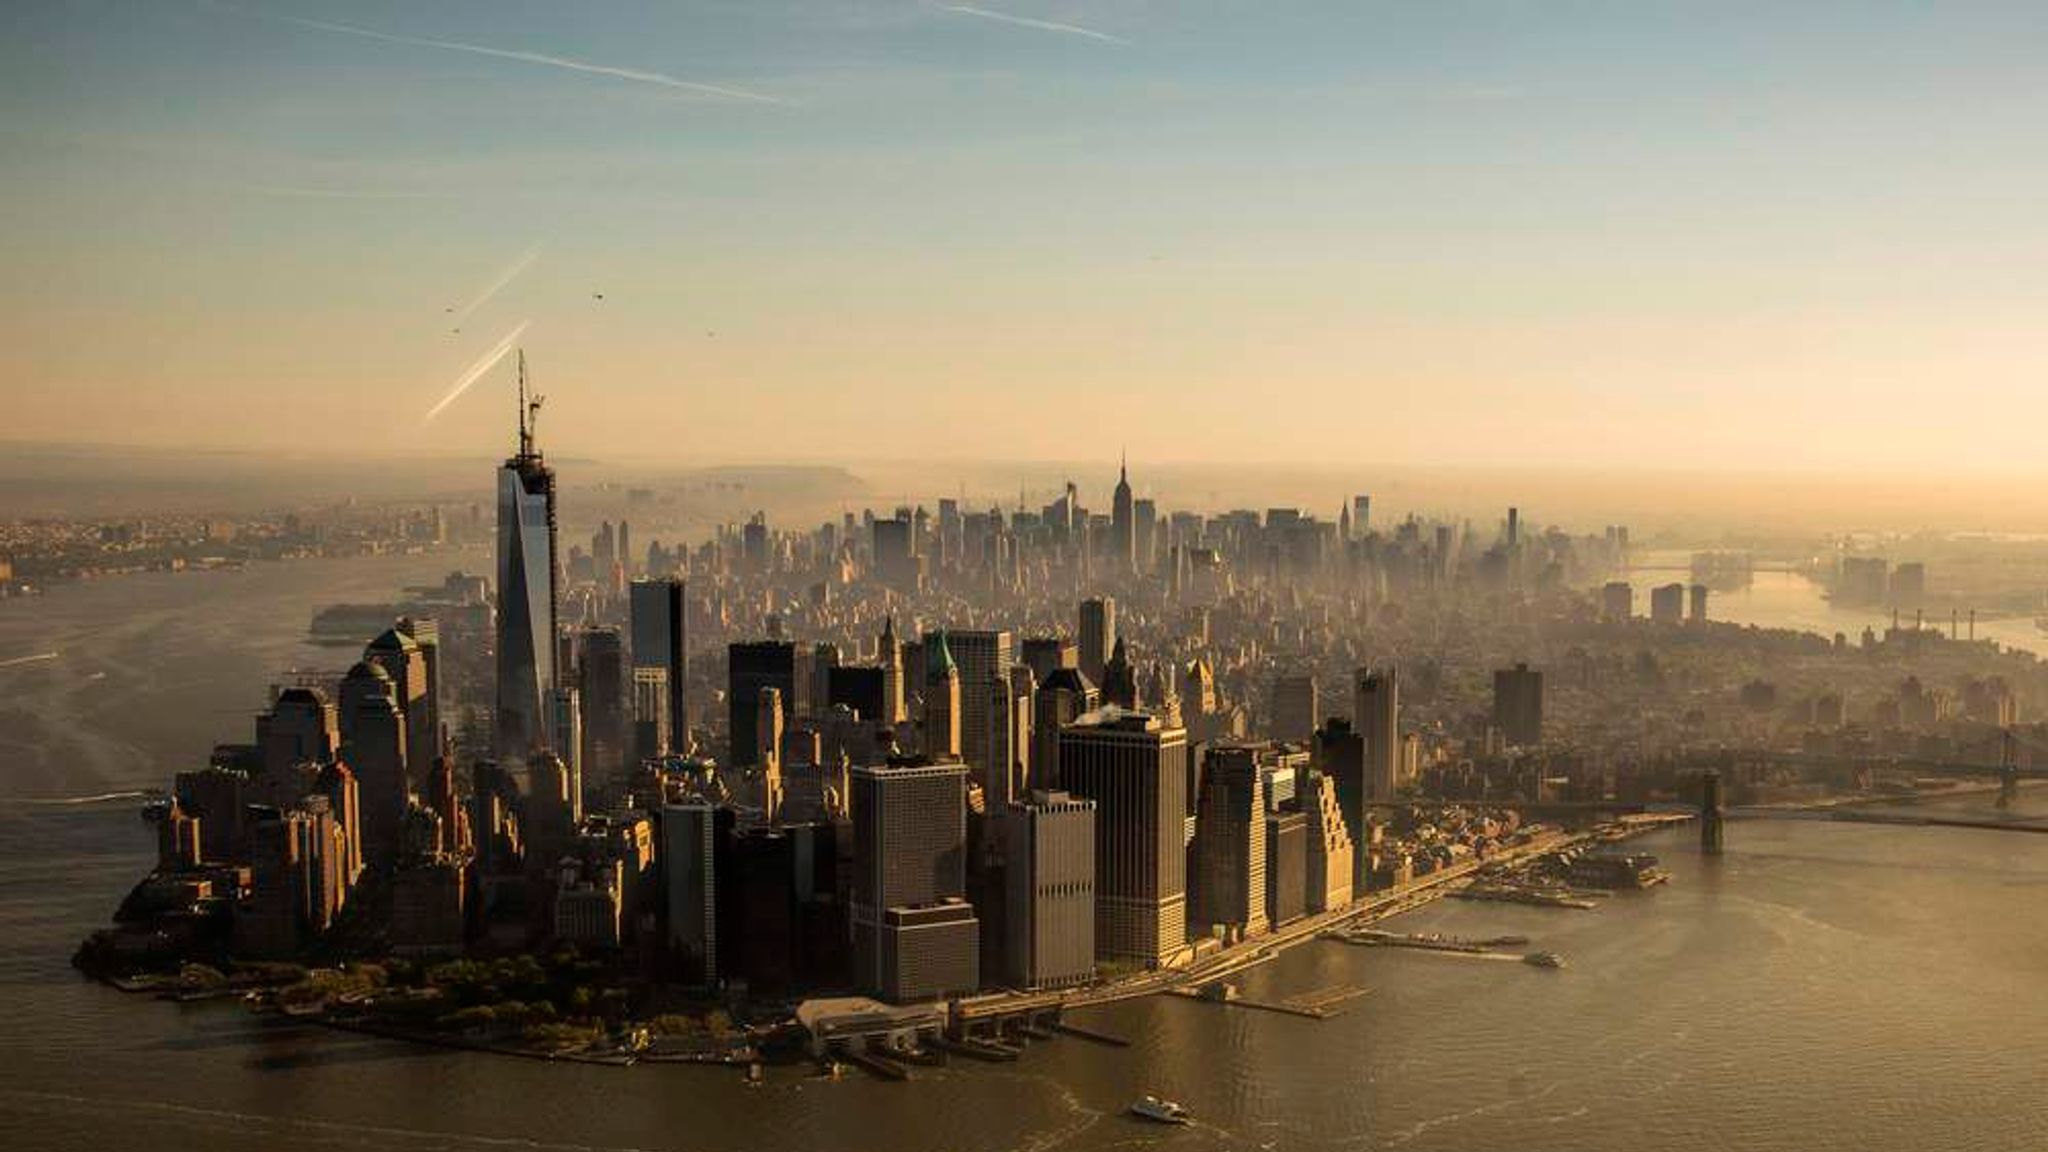 Is new york one of the largest cities in the world was фото 9